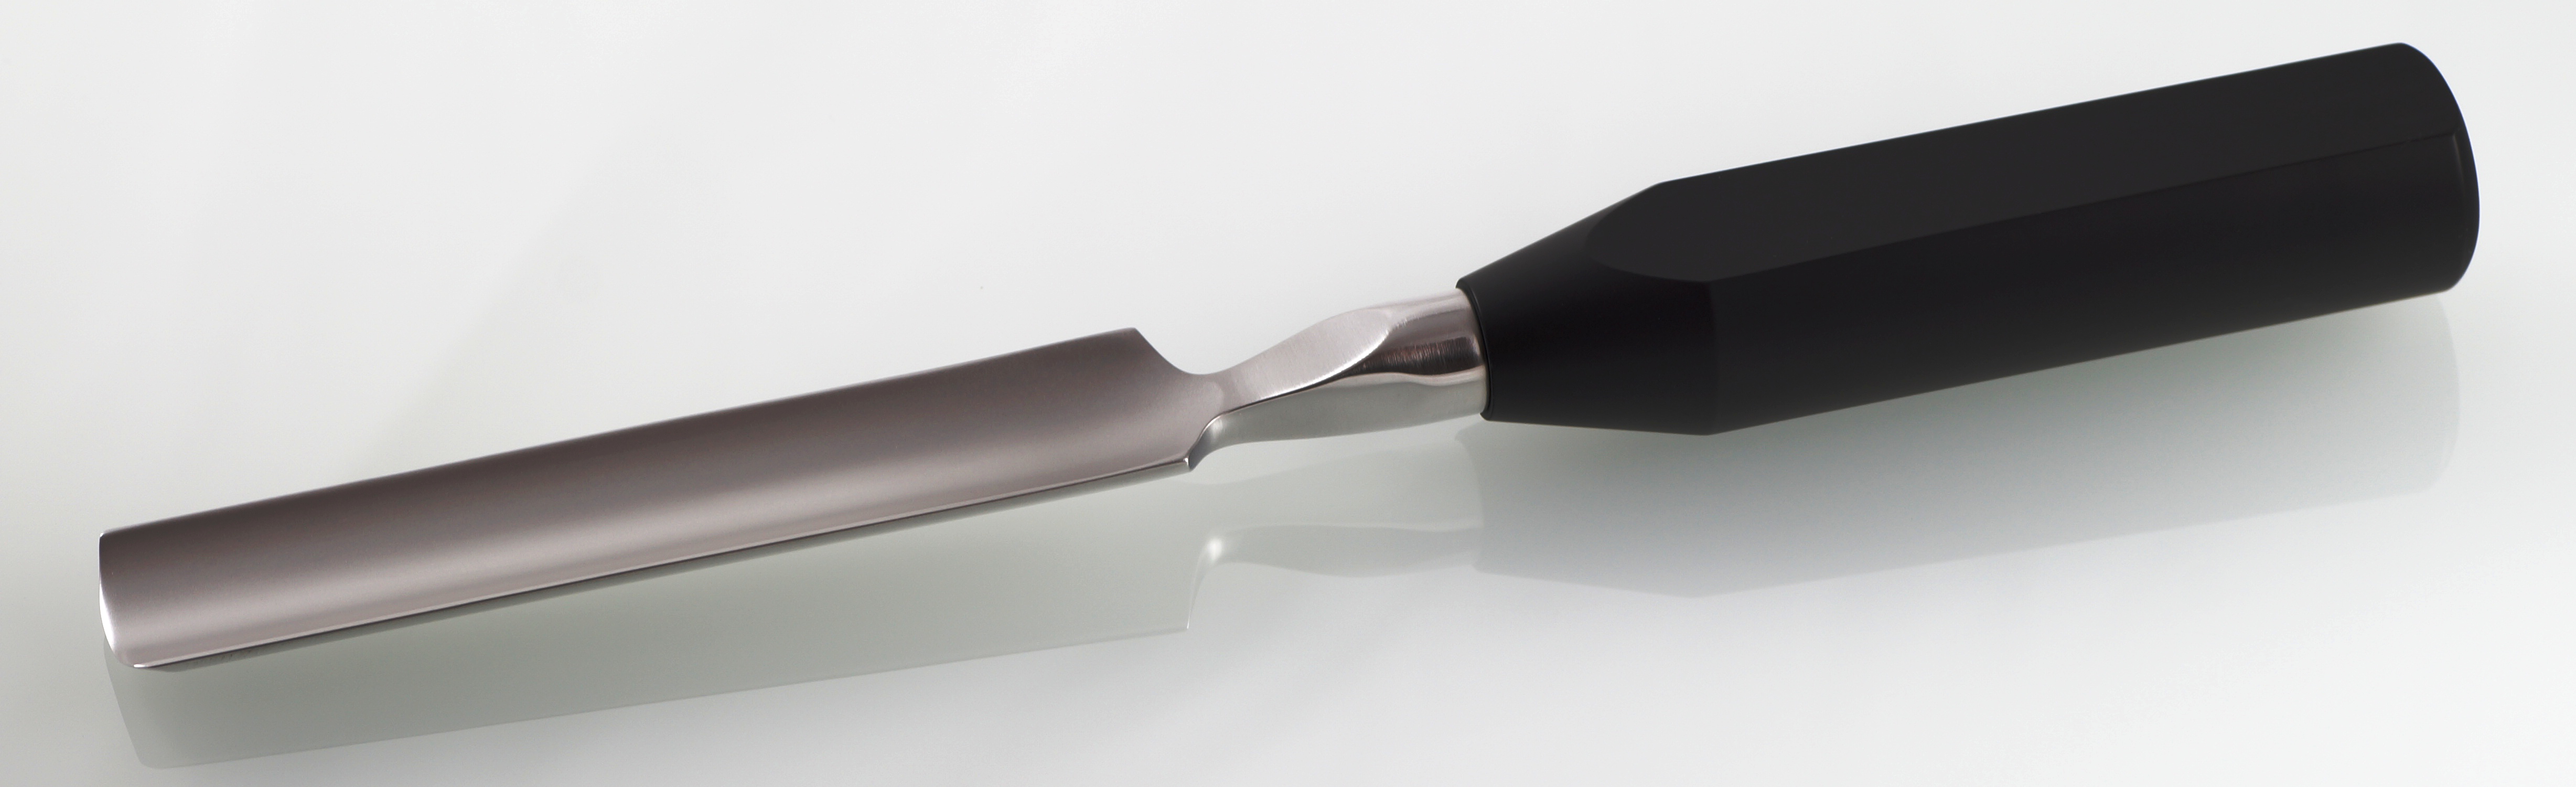 straight and curved bone gouge with plastic handle